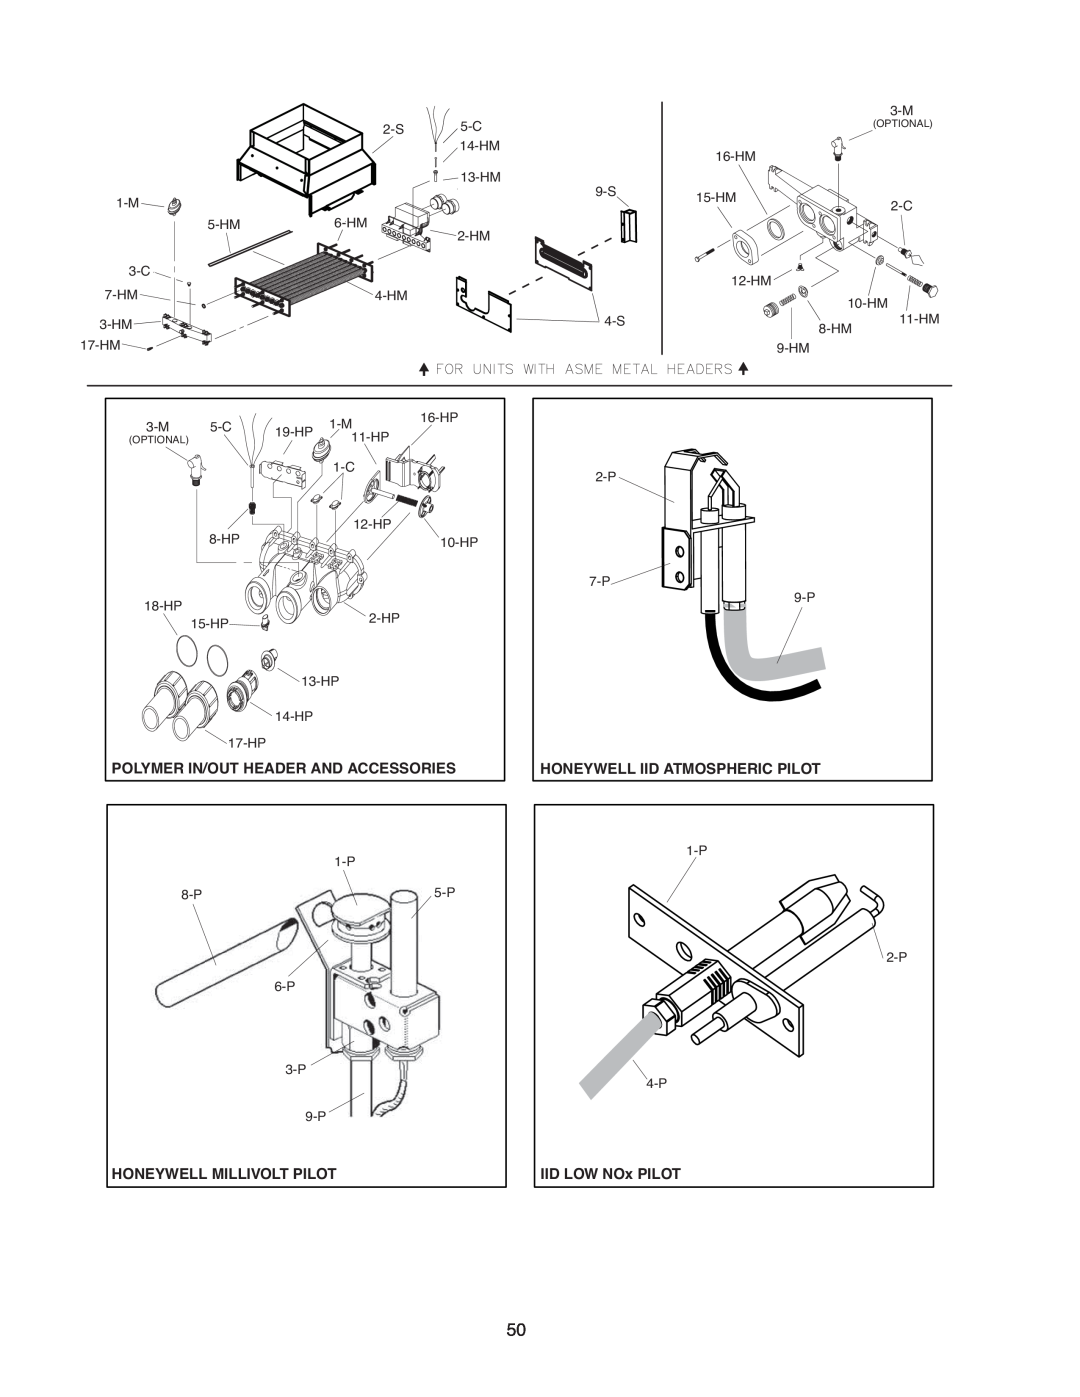 Raypak 407A, 406A, 206A Polymer In/Out Header And Accessories, Honeywell Iid Atmospheric Pilot, Honeywell Millivolt Pilot 